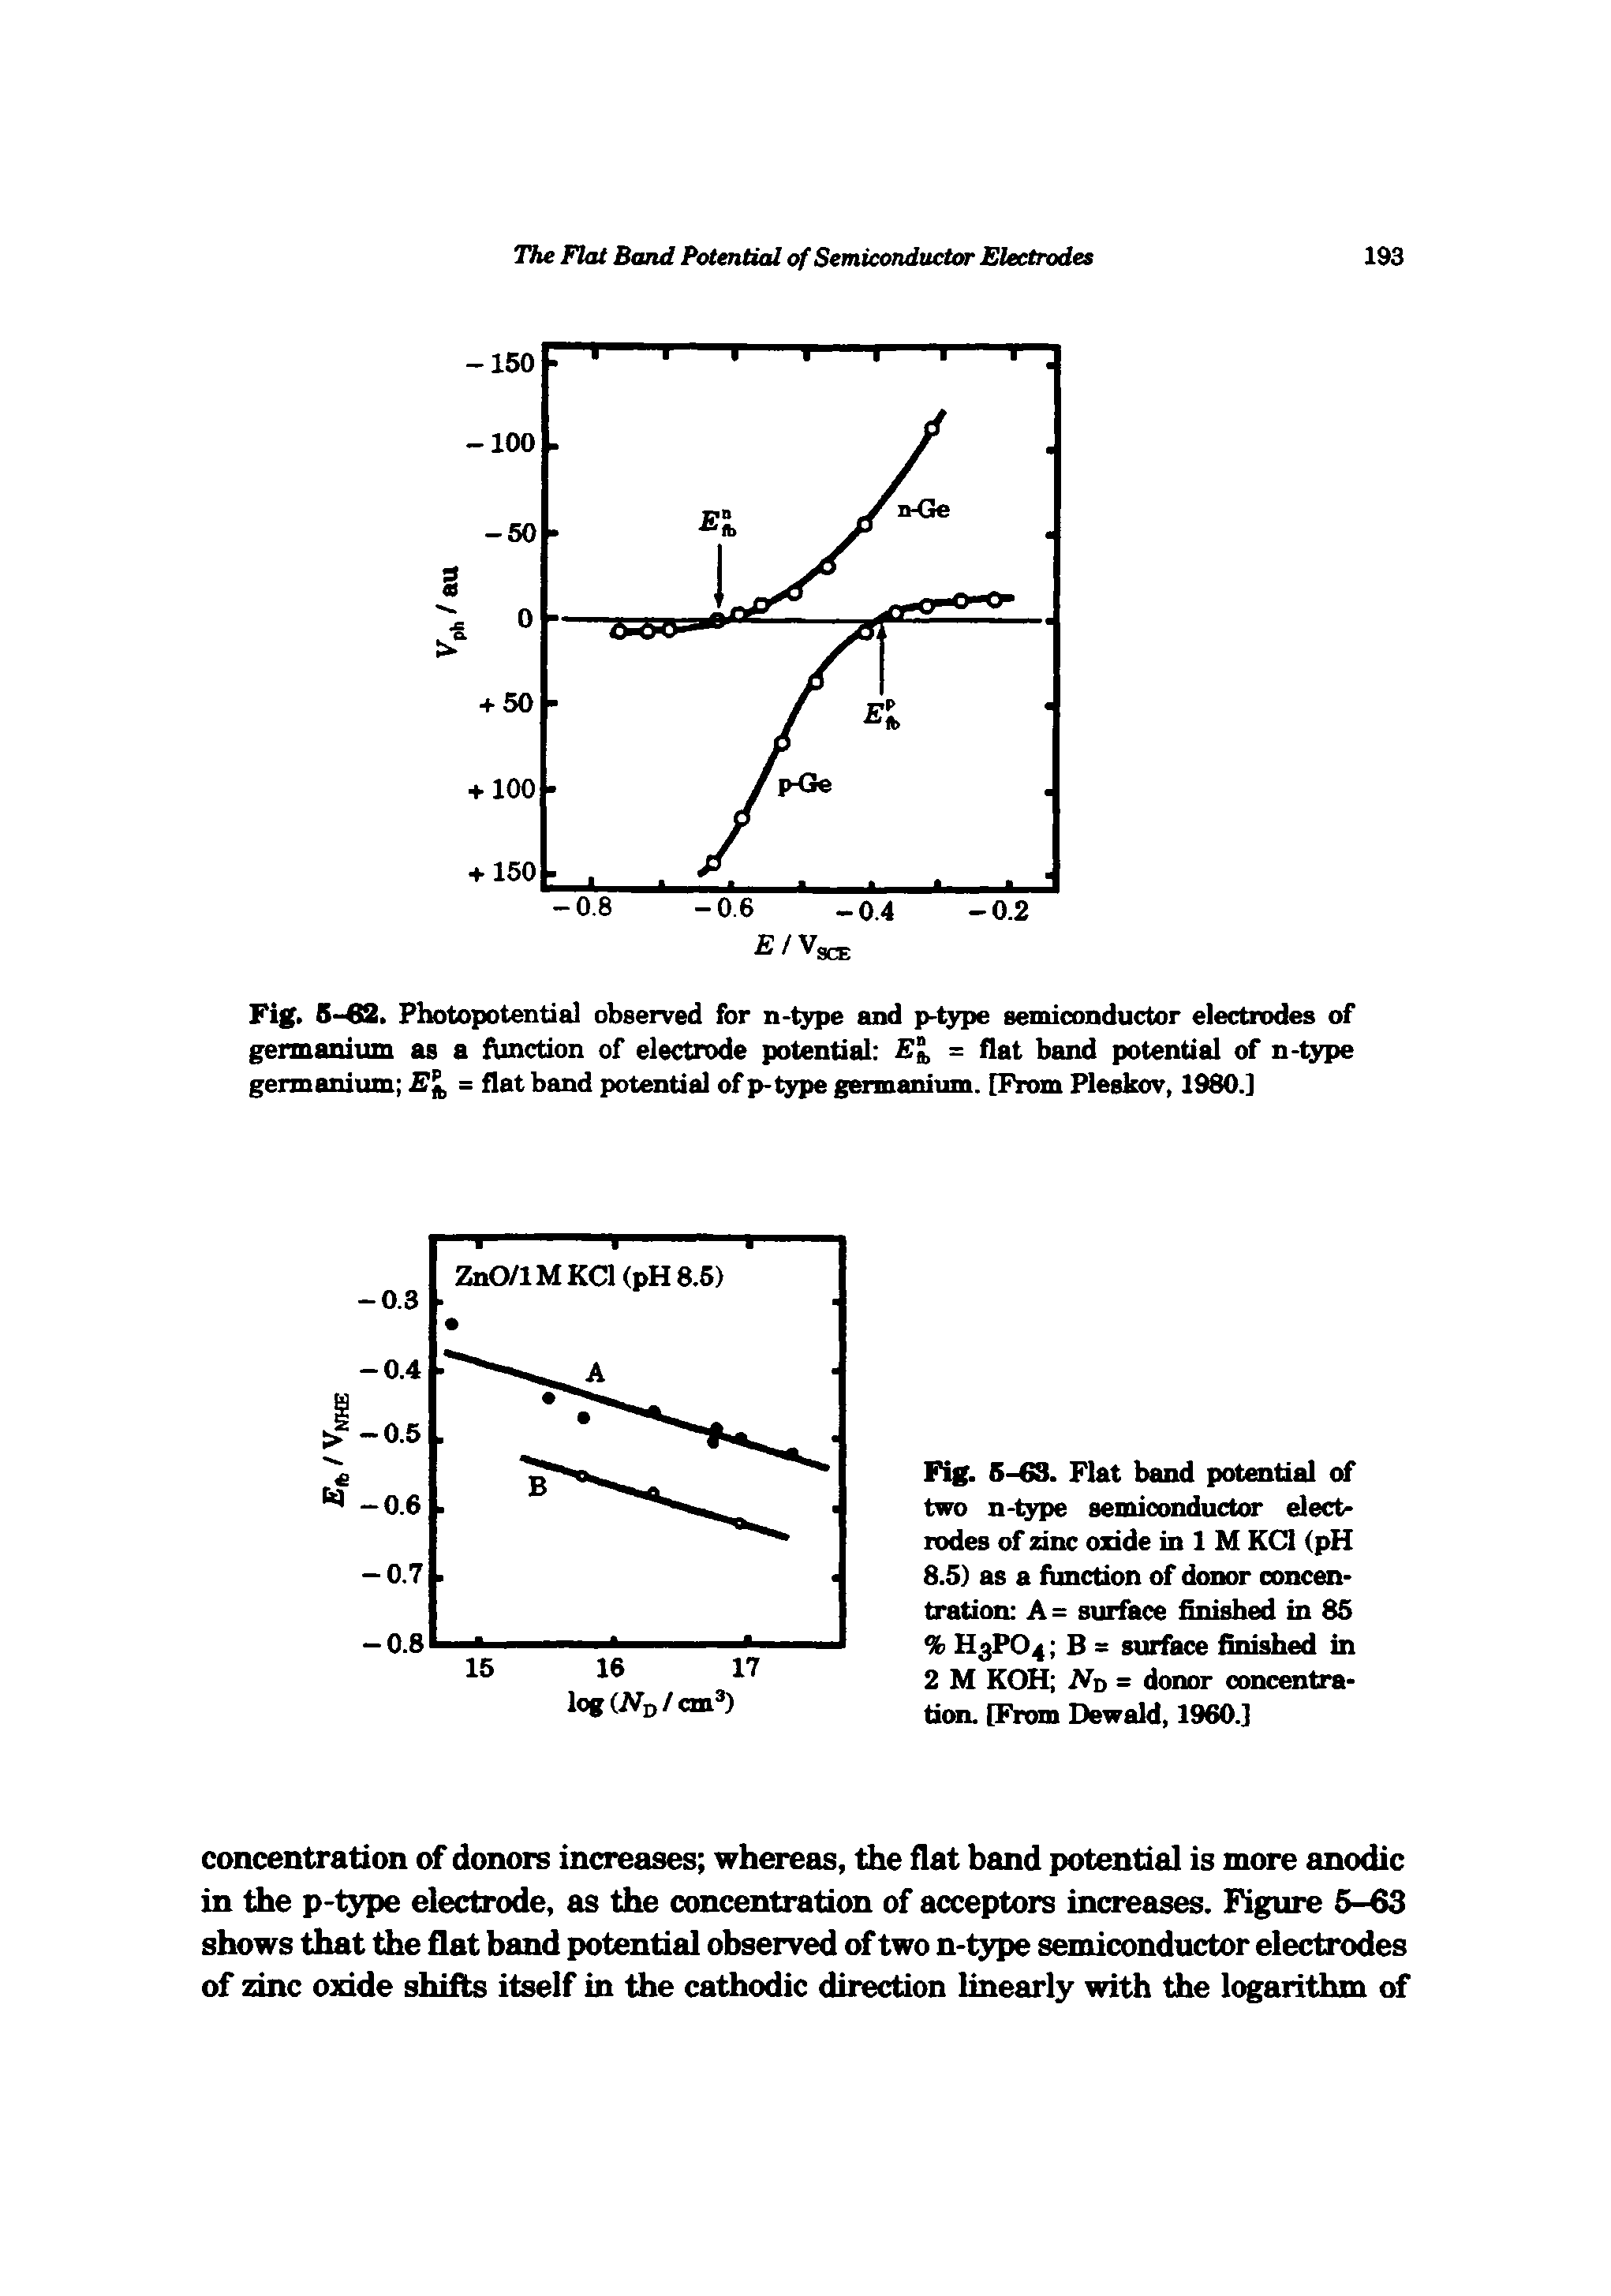 Fig. 5-63. Flat band potential of two n-type semiconductor electrodes of zinc oxide in 1 M KCl (pH 8.5) as a function of donor concentration A= surface finished in 85 % H3PO4 B = surface finished in 2 M KOH = donor concentration. [From Dewald, I960.]...